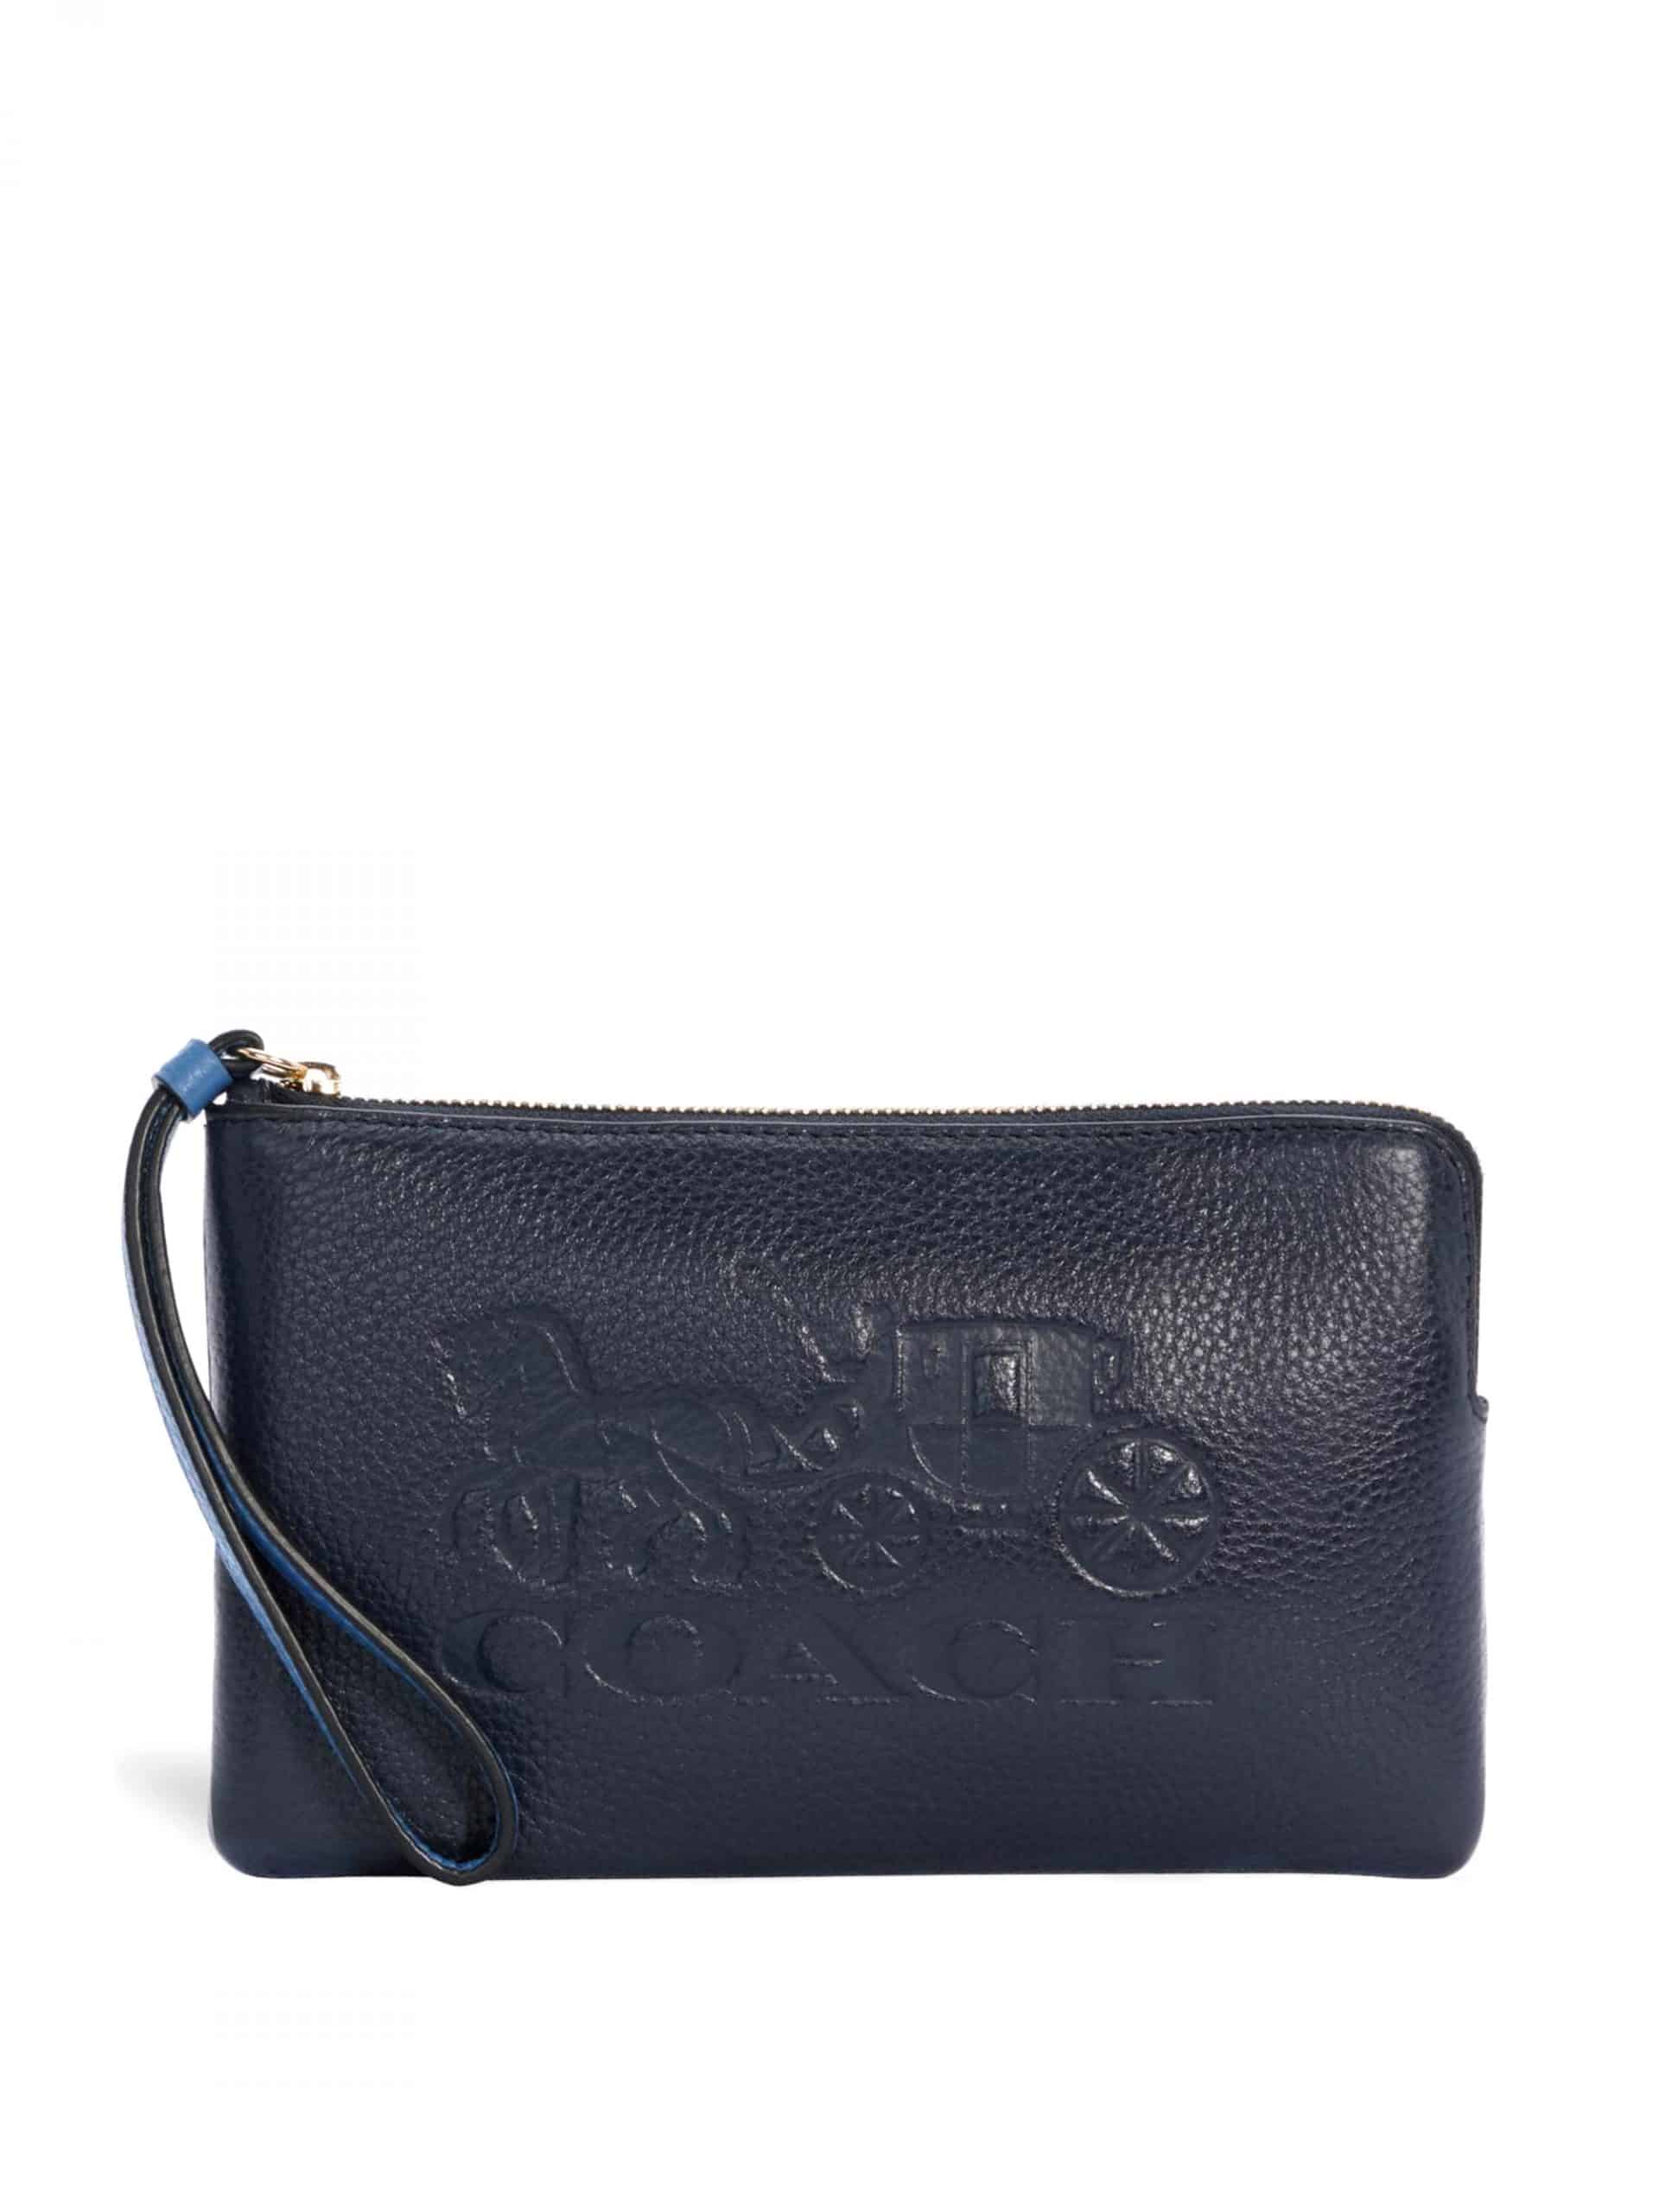 Coach Large Wristlet Horse Carriage Midnight - Averand